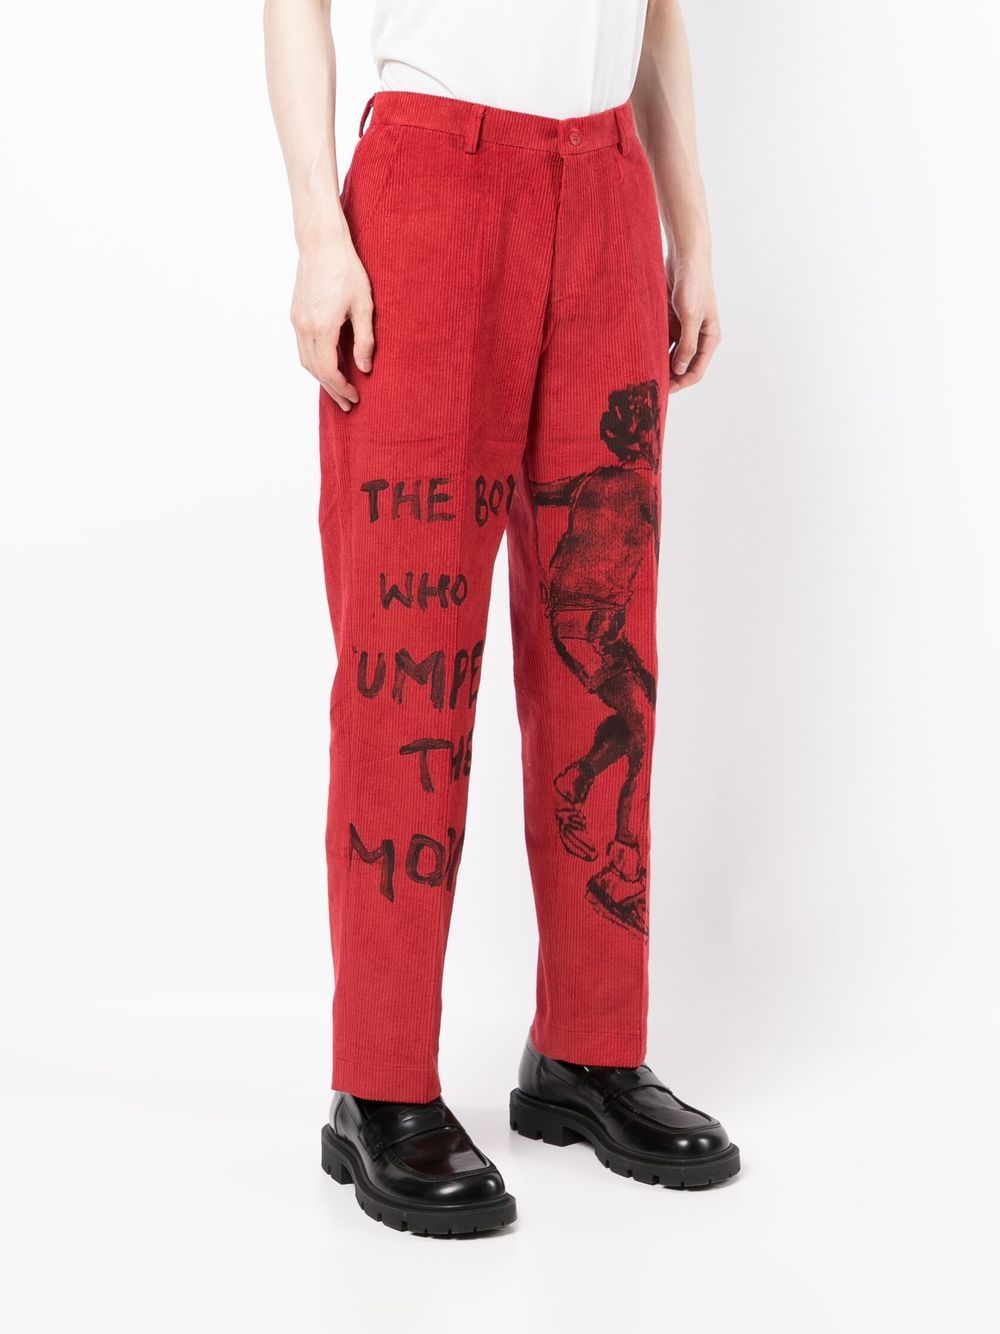 ﻿KIDSUPER Jumped the Moon curdoroy straight trousers Red - MAISONDEFASHION.COM